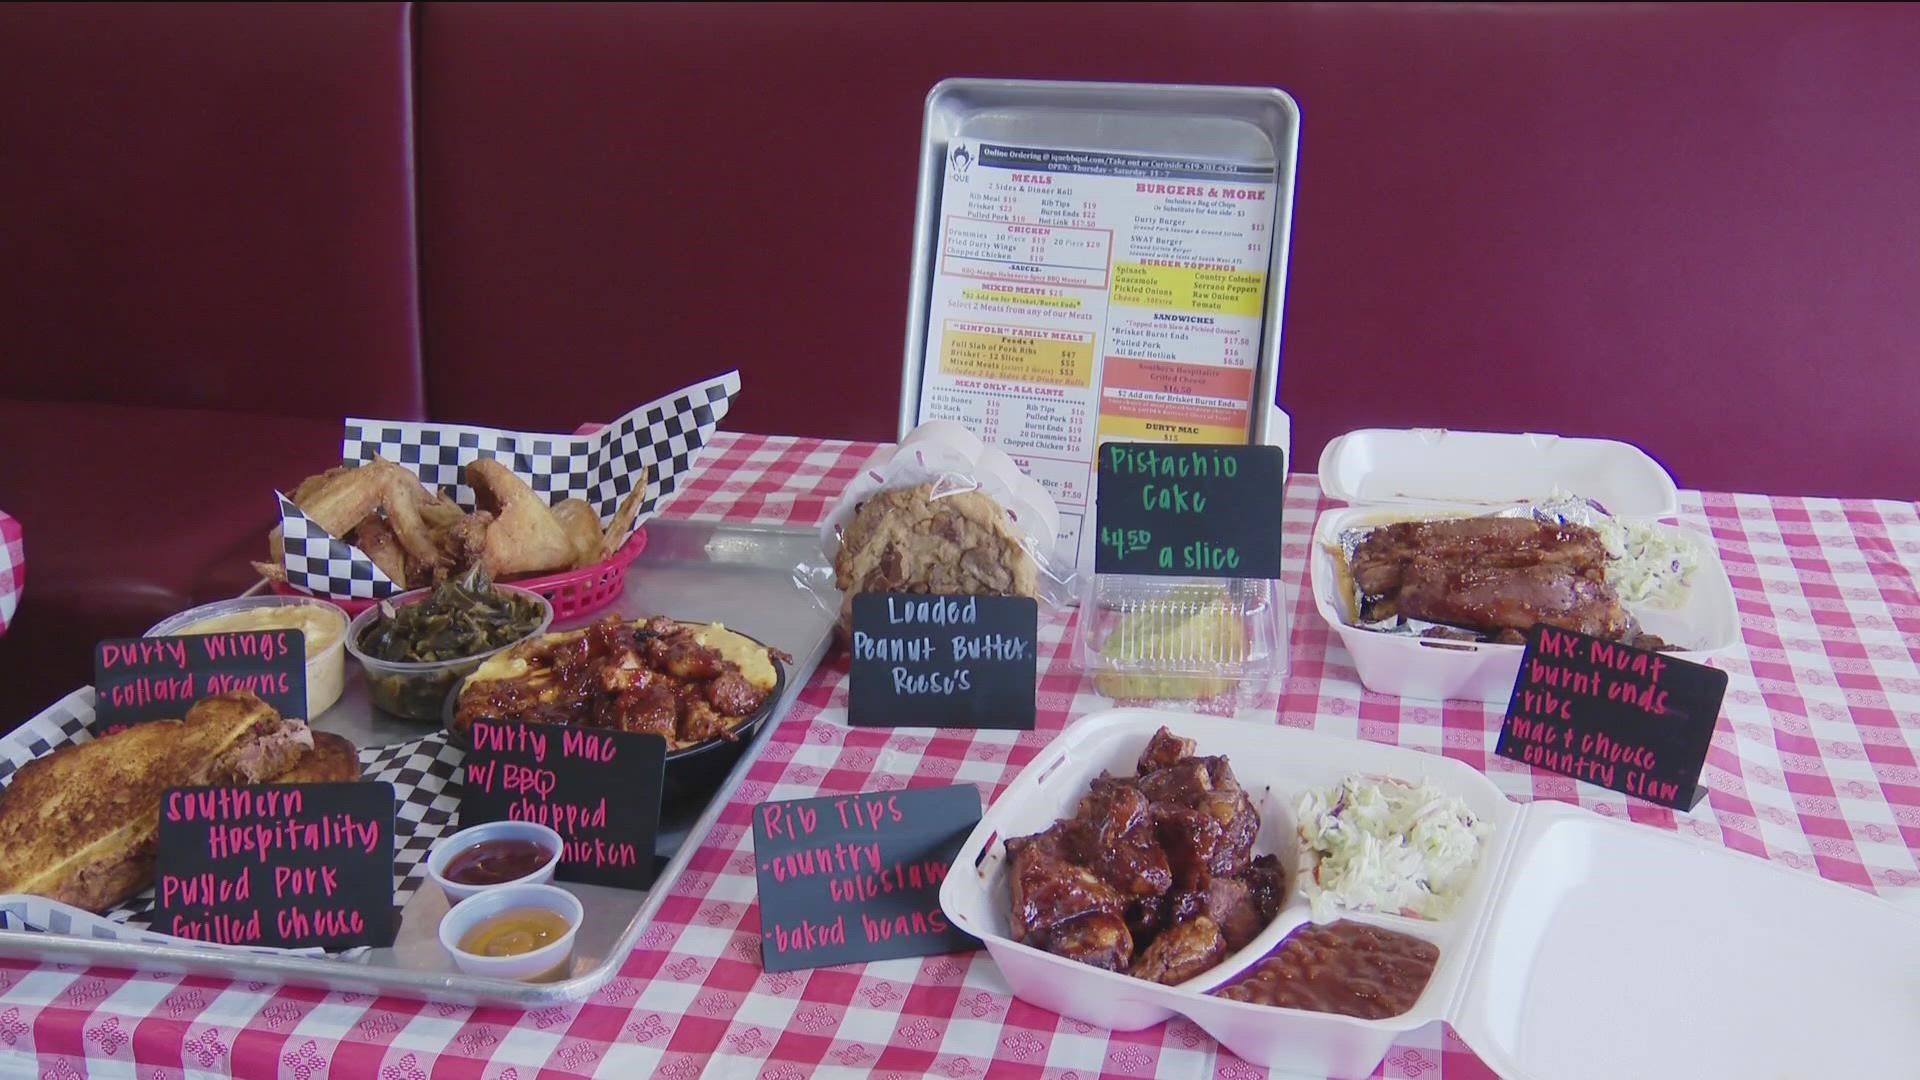 I-Que BBQ in La Mesa started as a catering business then opened a storefront two years ago. They serve classics like brisket, fried chicken and baked beans!